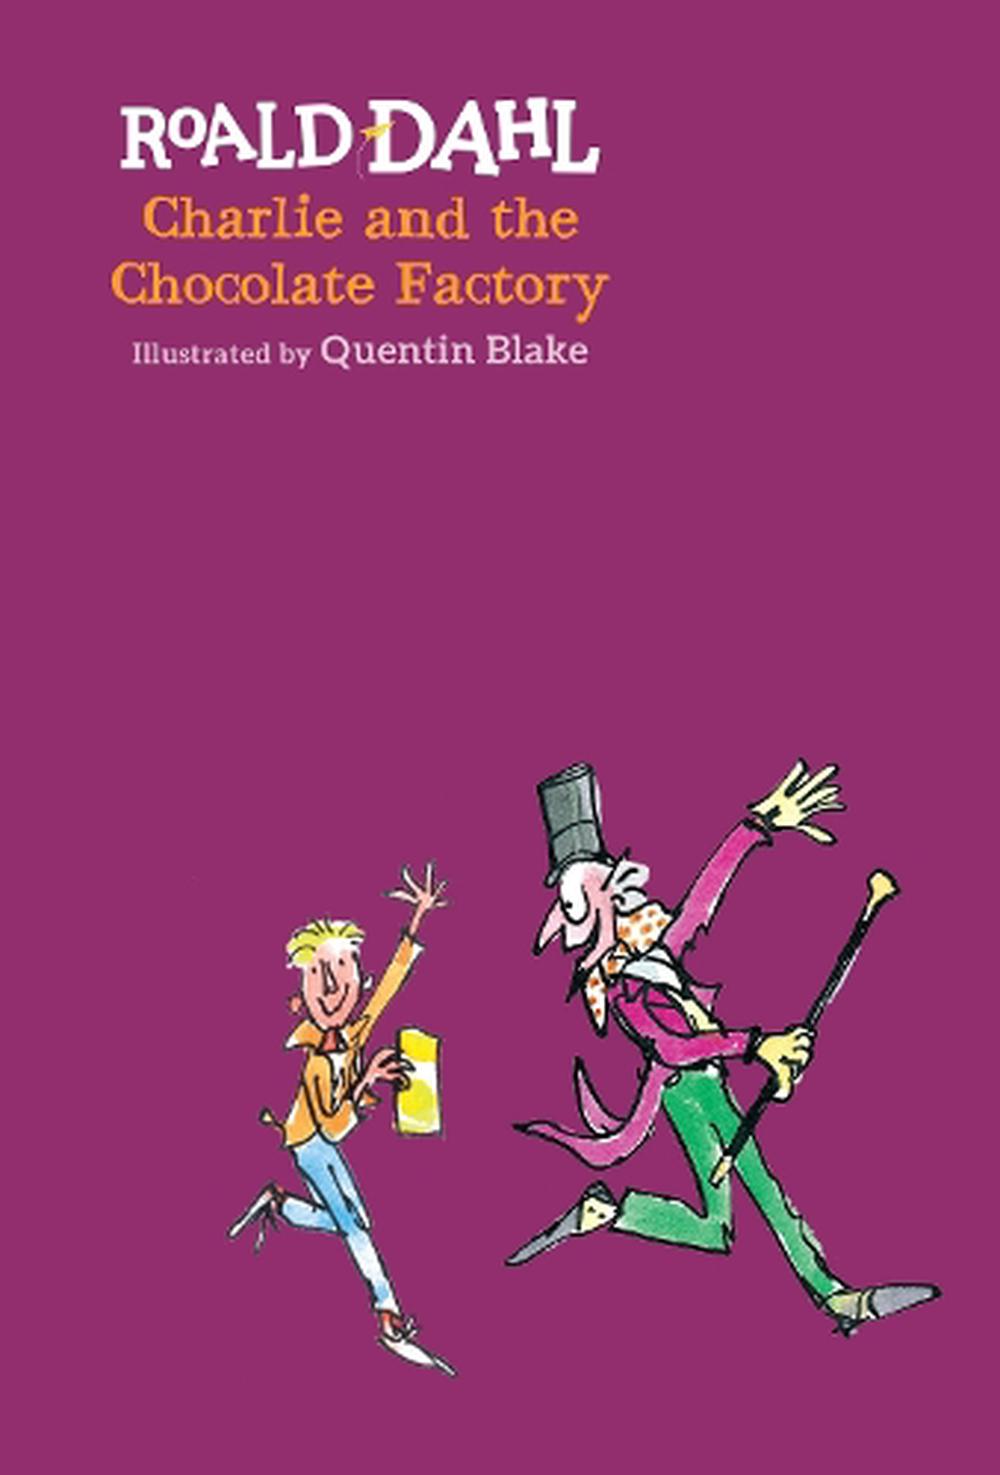 charlie and the chocolate factory book pages